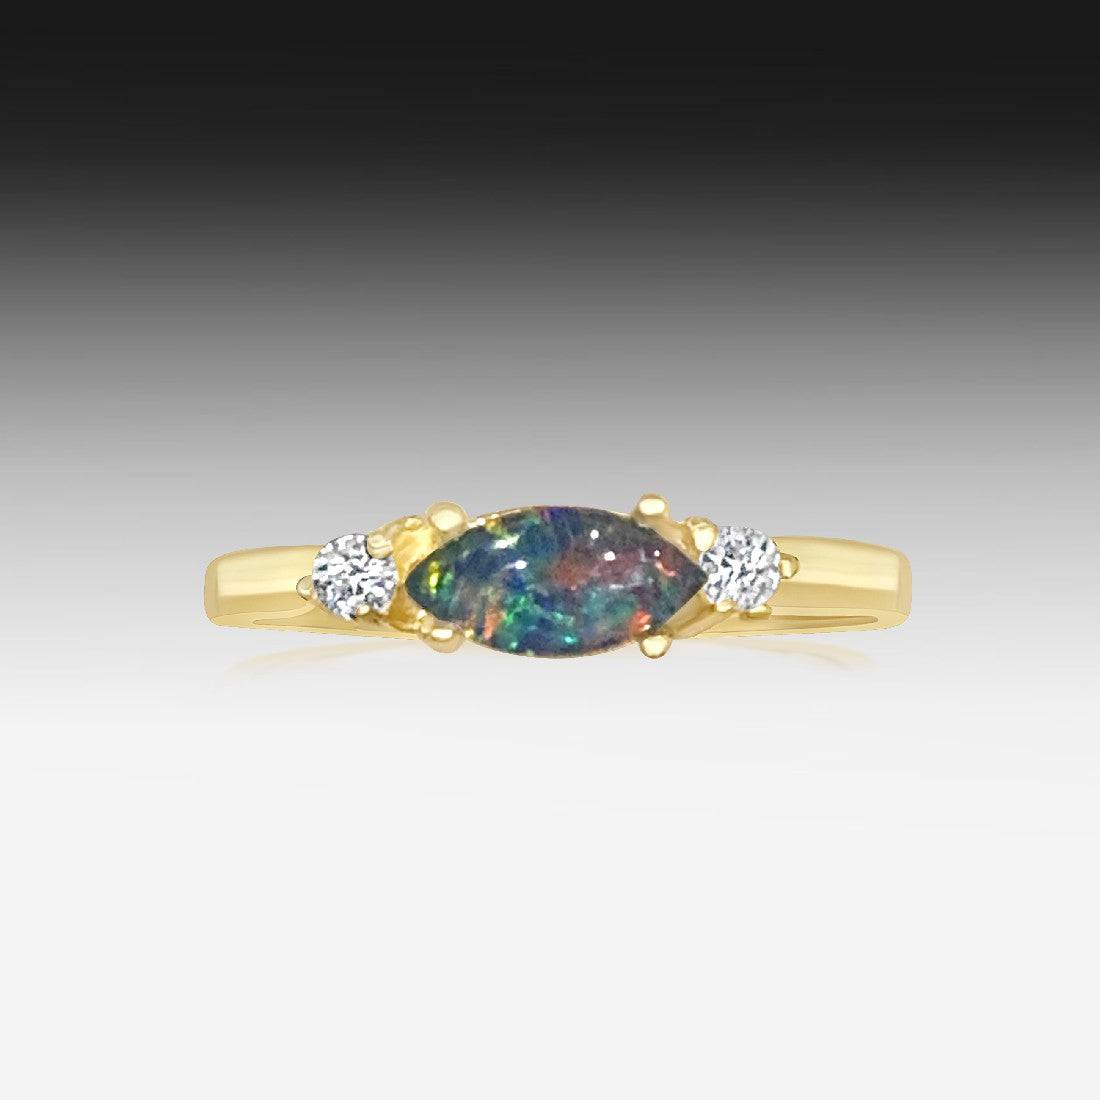 Sterling Silver Gold plated Opal triplet and cubic zirconia ring - Masterpiece Jewellery Opal & Gems Sydney Australia | Online Shop